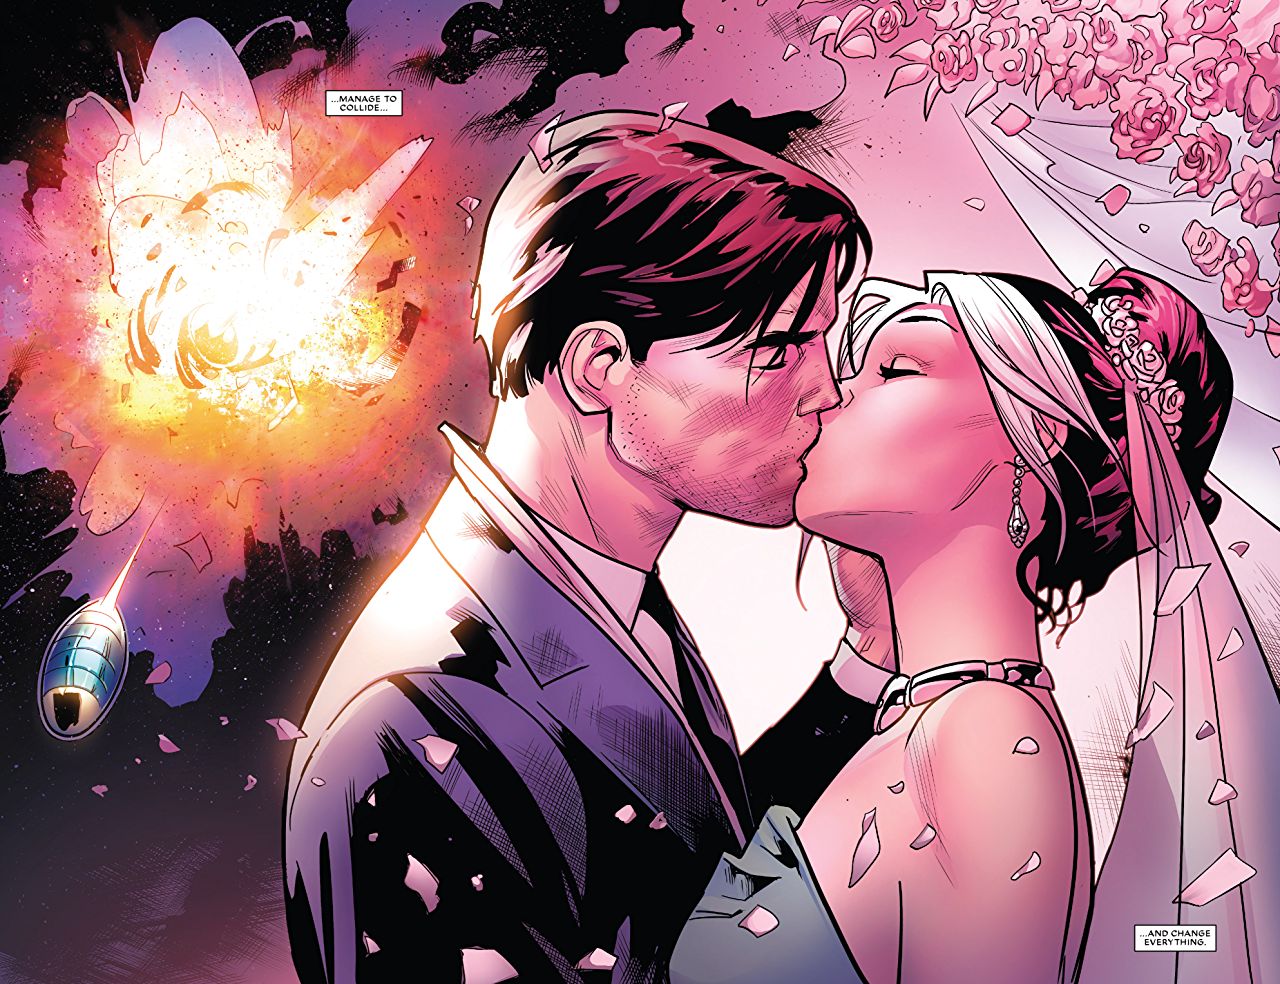 Mr. and Mrs. X #1